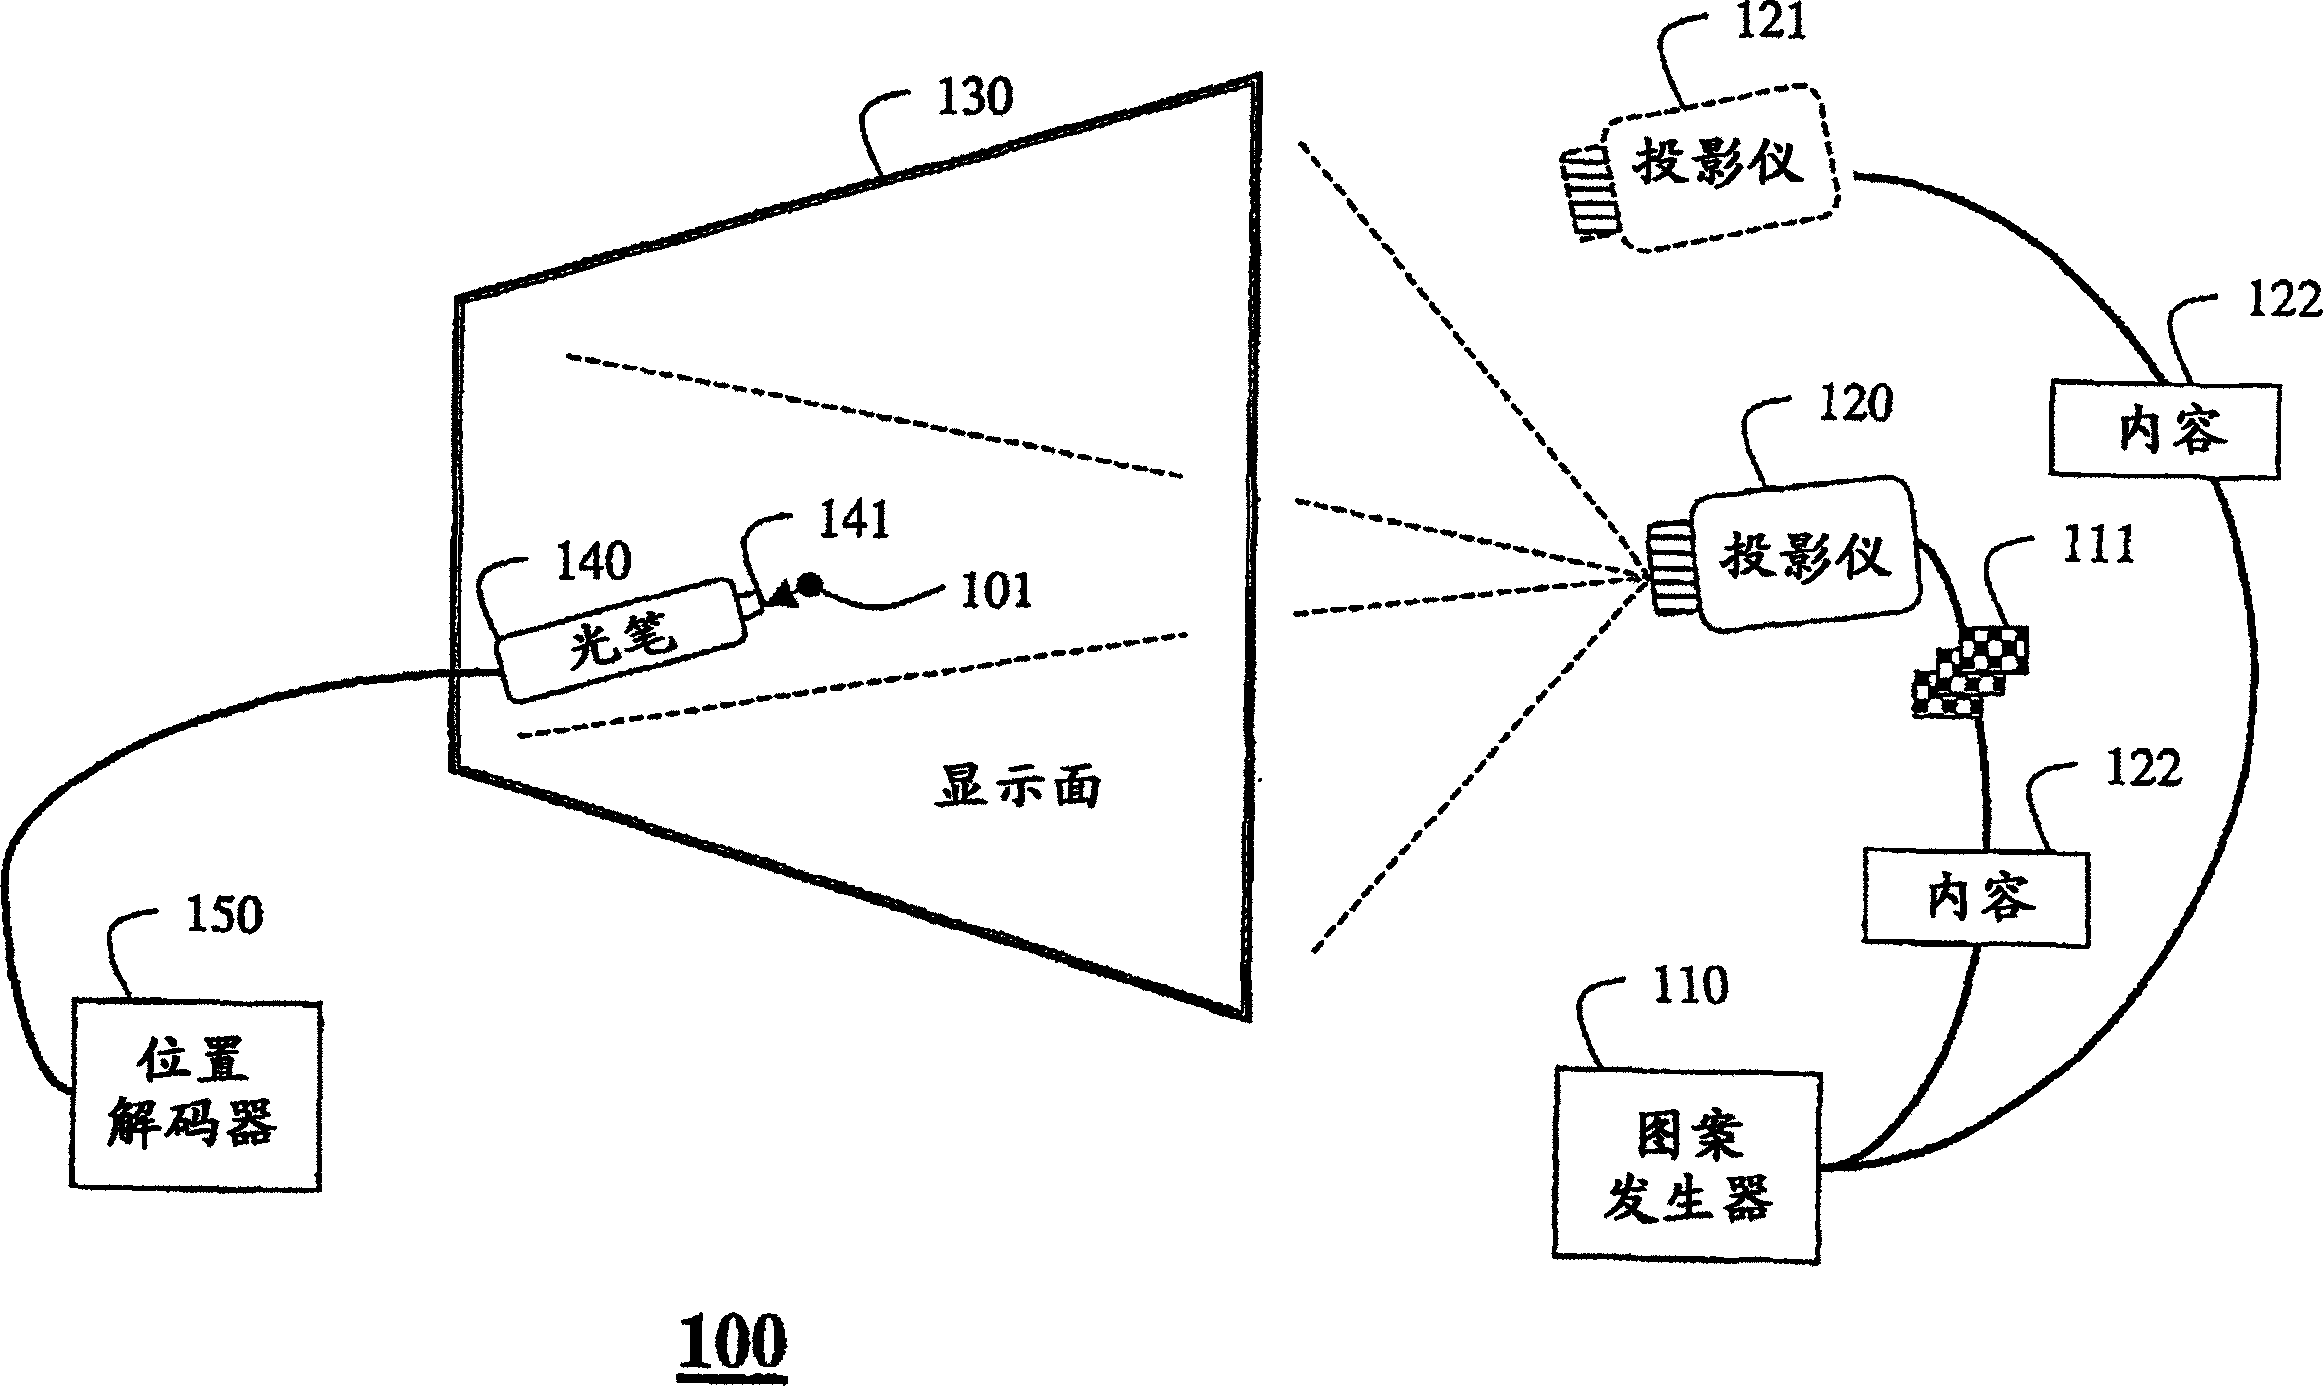 Method for determining location on display surface and interactive display system